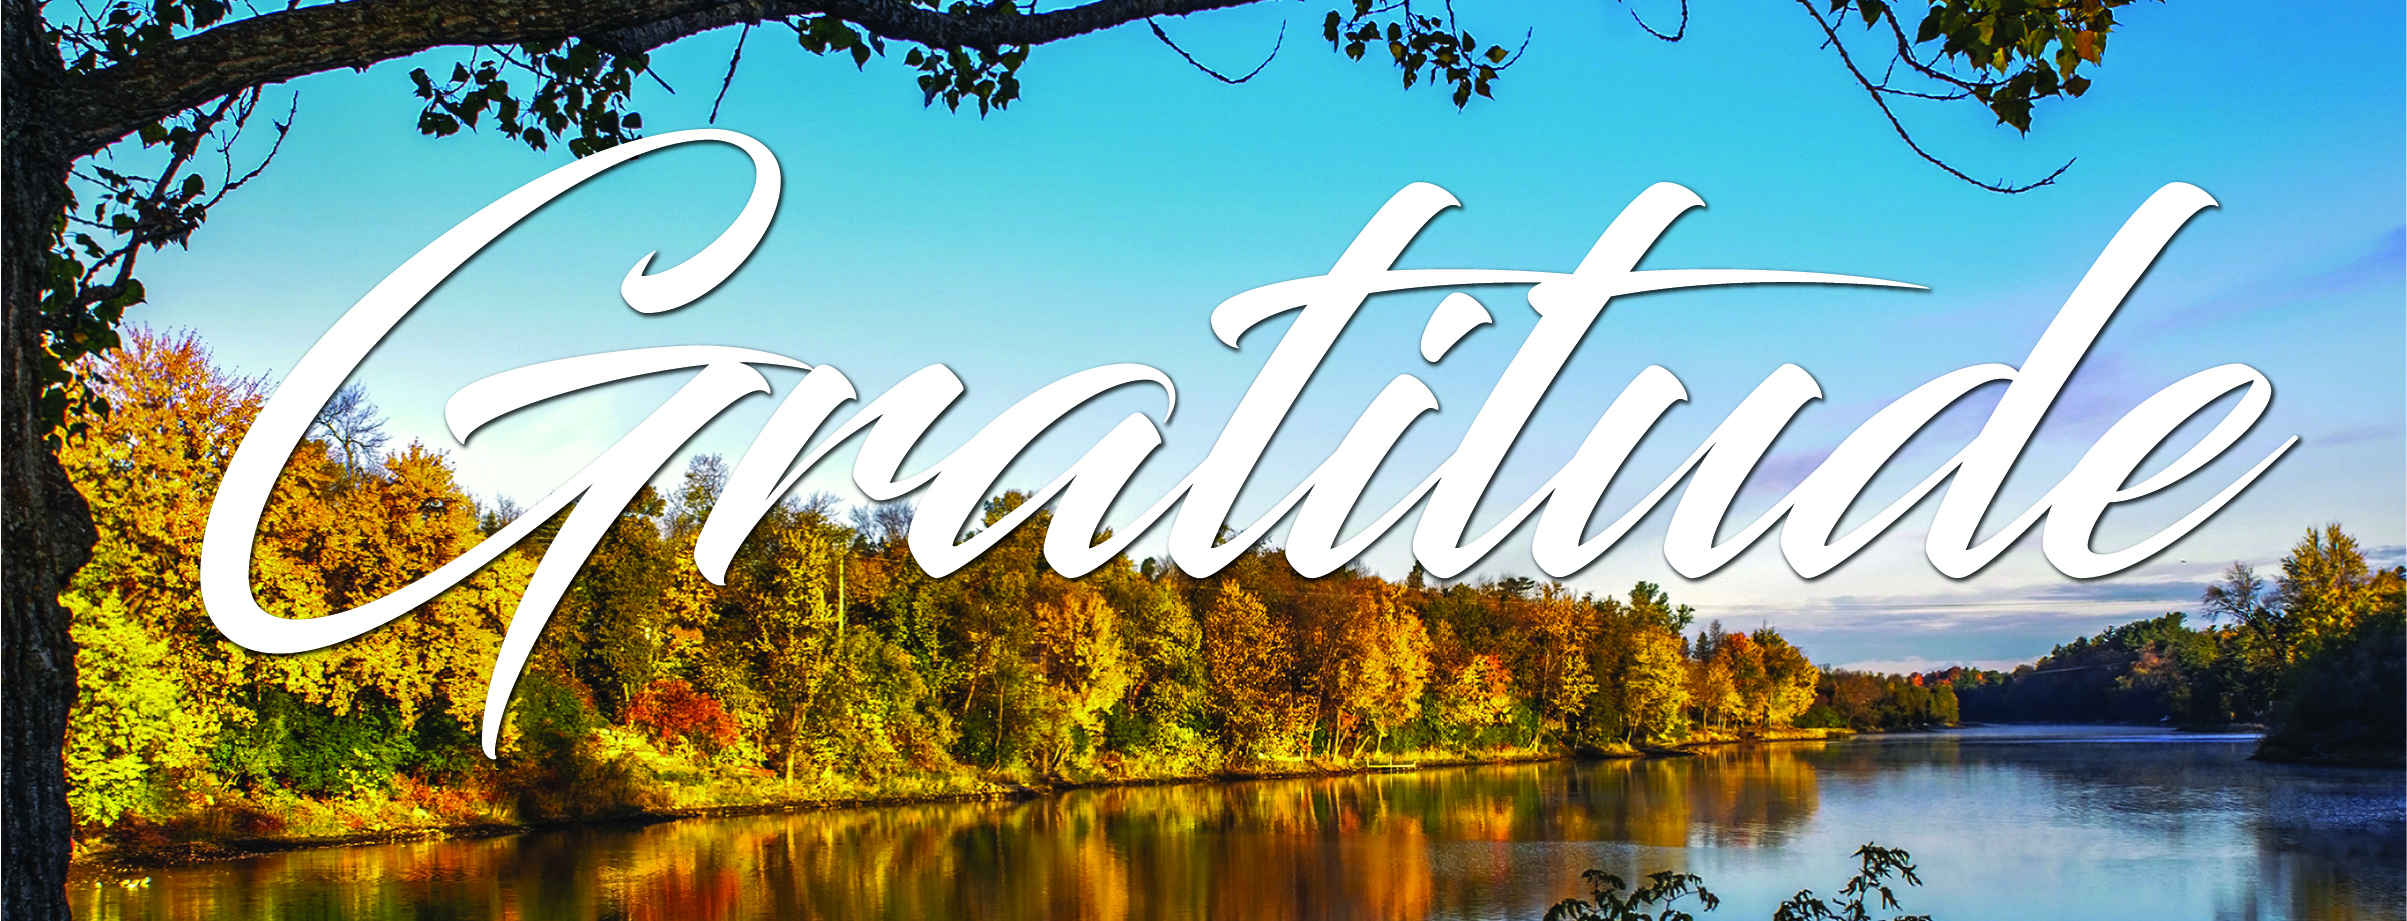 Image of river with word Gratitude overlaid on it